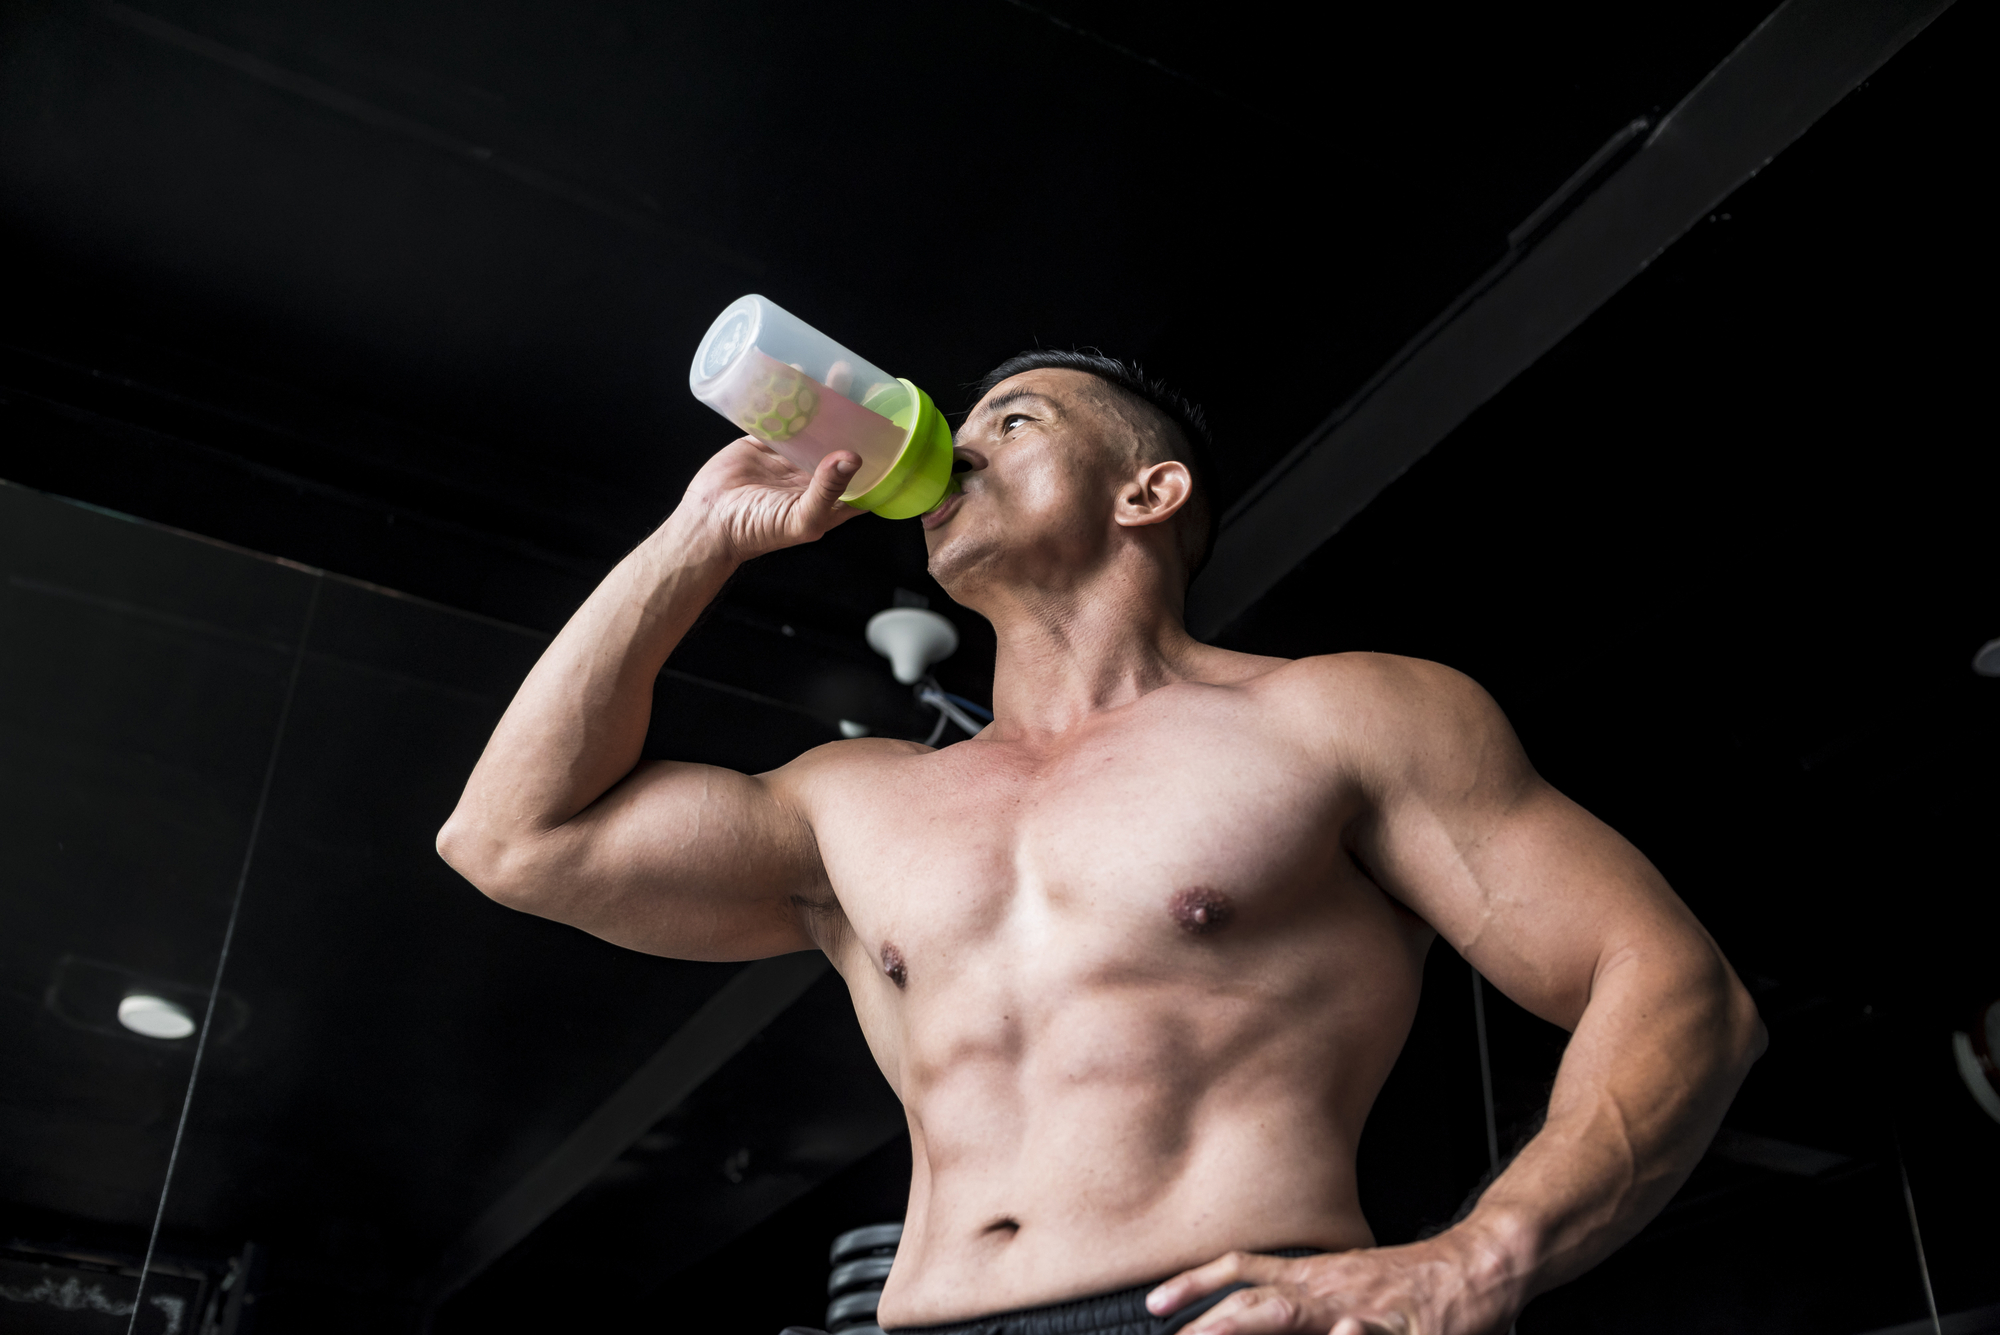 Fit man drinks his pre workout drink from a green water bottle in a gym